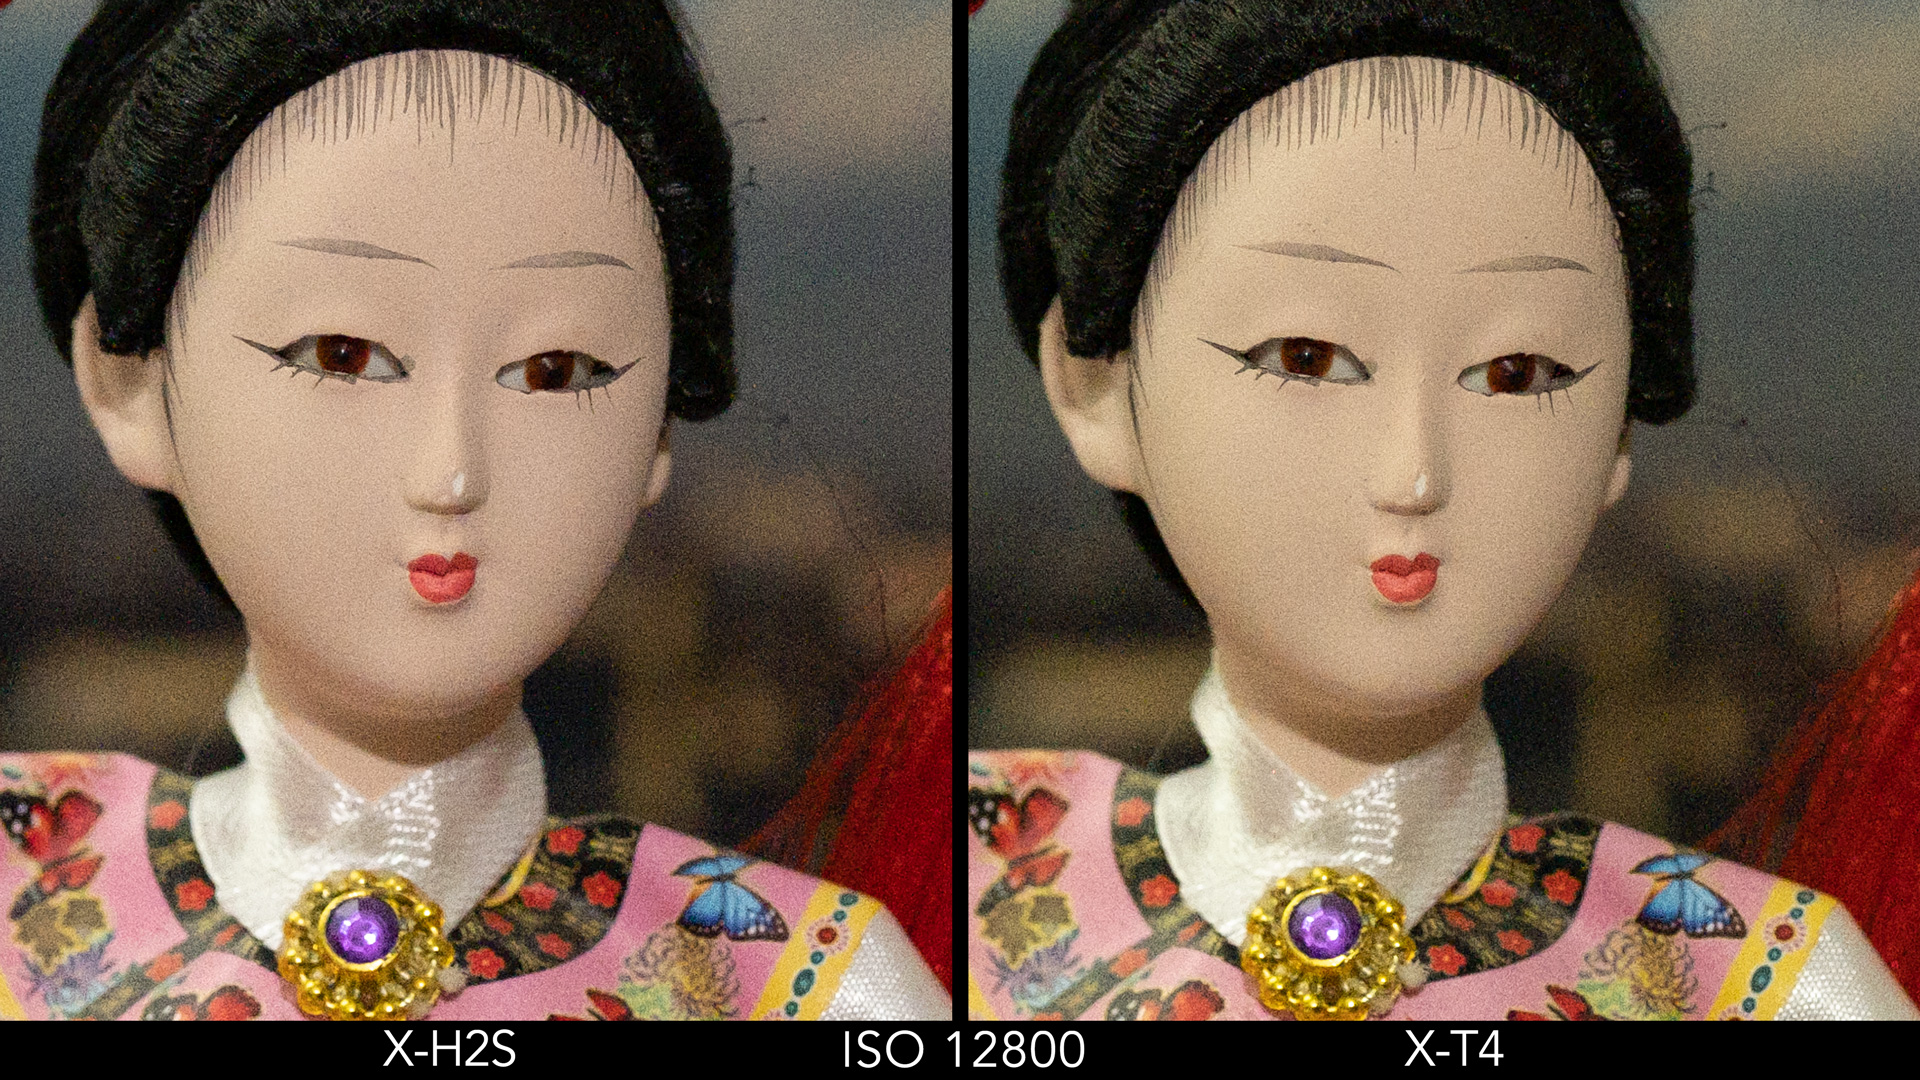 Side by side crop of the Japanese doll, showing the quality at ISO 12800 for the X-H2S and X-T4